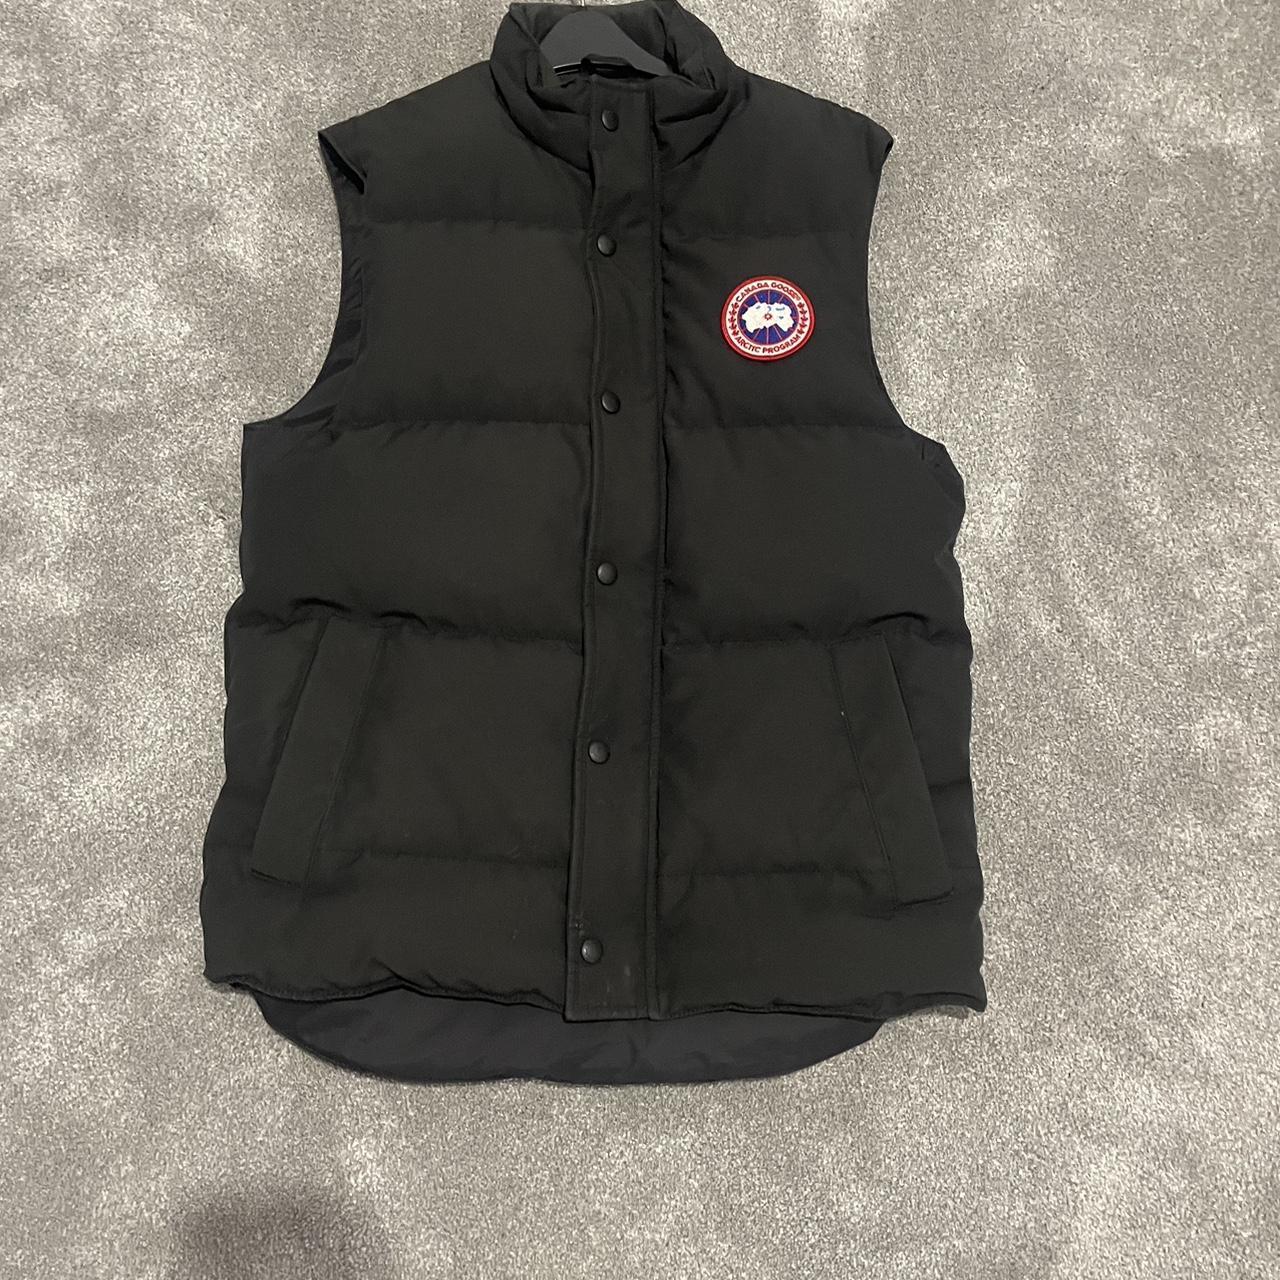 canada goose gilet- amazing condition, add snap for... - Depop